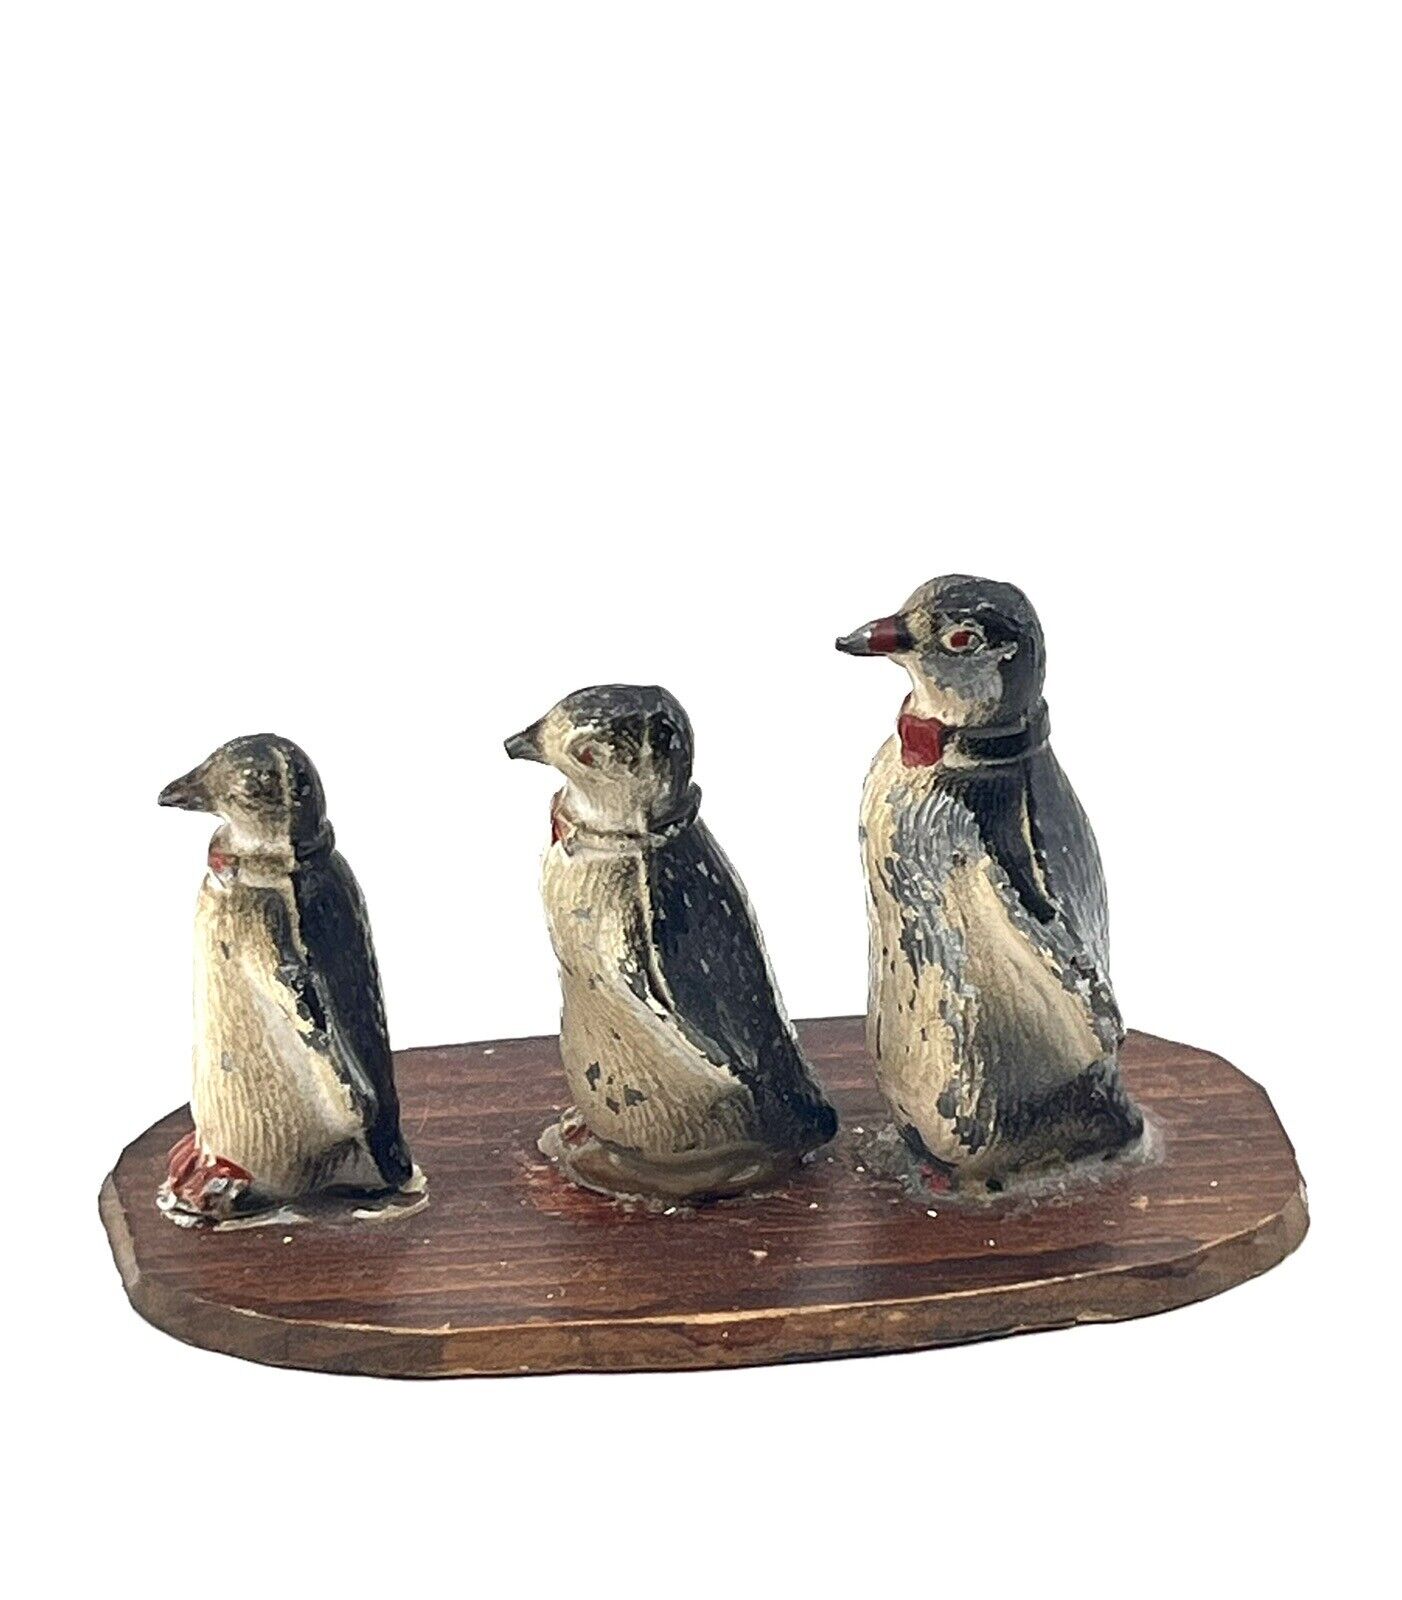 Antique Set of PENGUINS on Wood Piece-1920's-30's- Pewter?-Has Wear-SEE PHOTOS